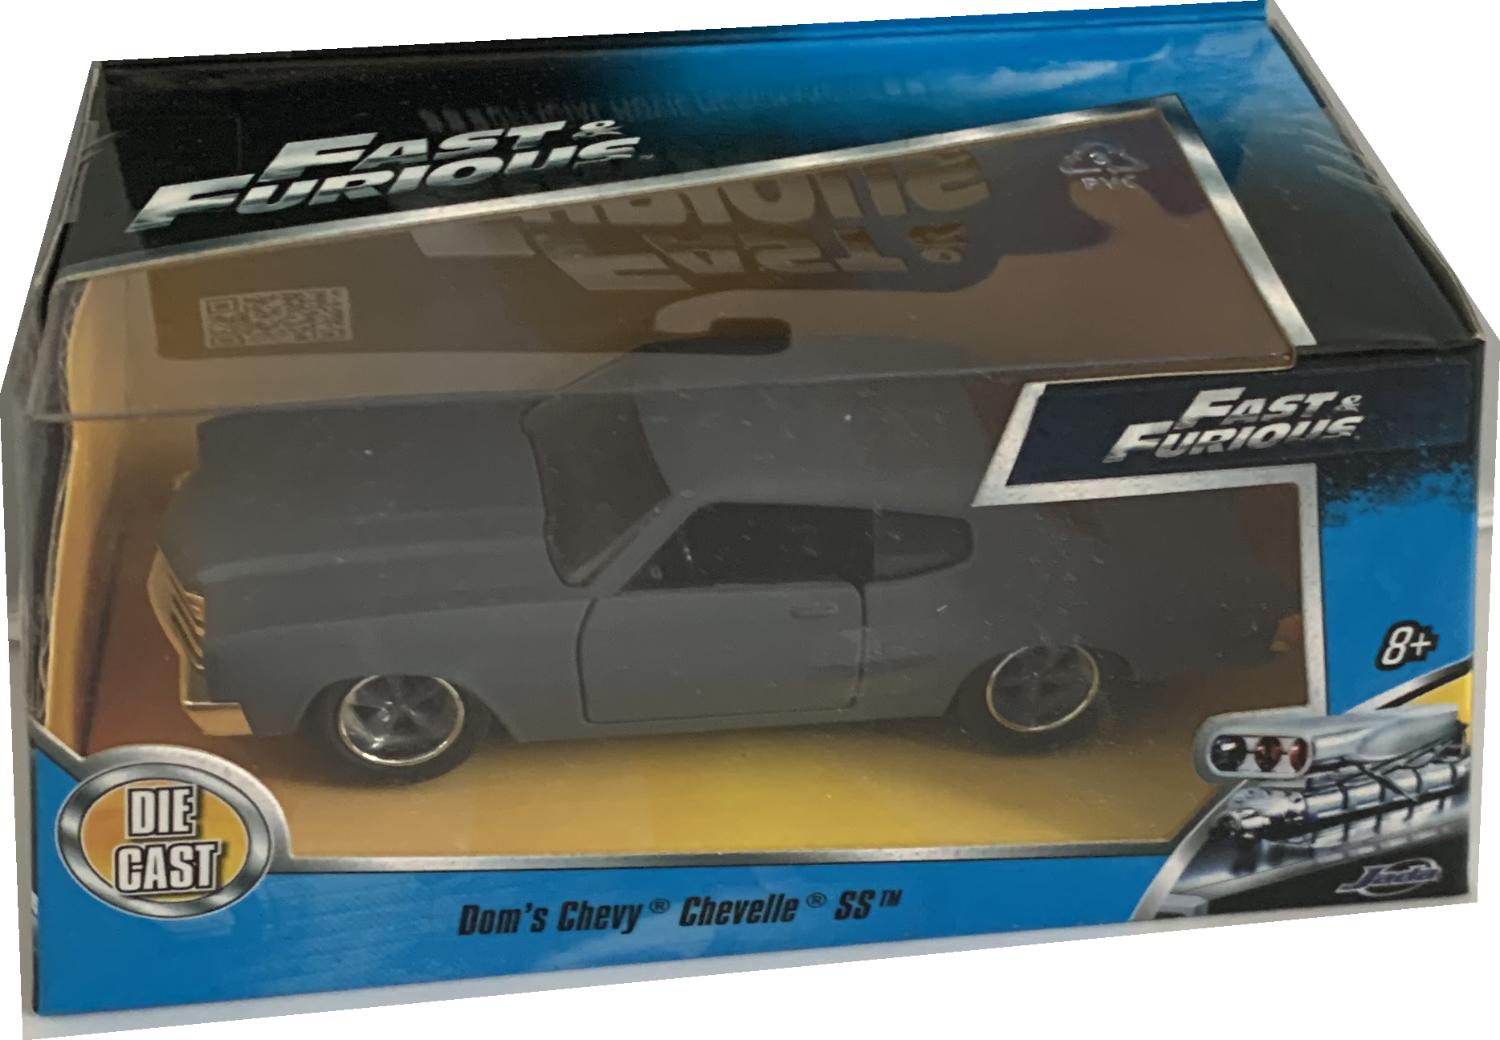 Fast and Furious 7 Dom’s Chevy Chevelle SS in matt grey 1:32 scale model from Jada